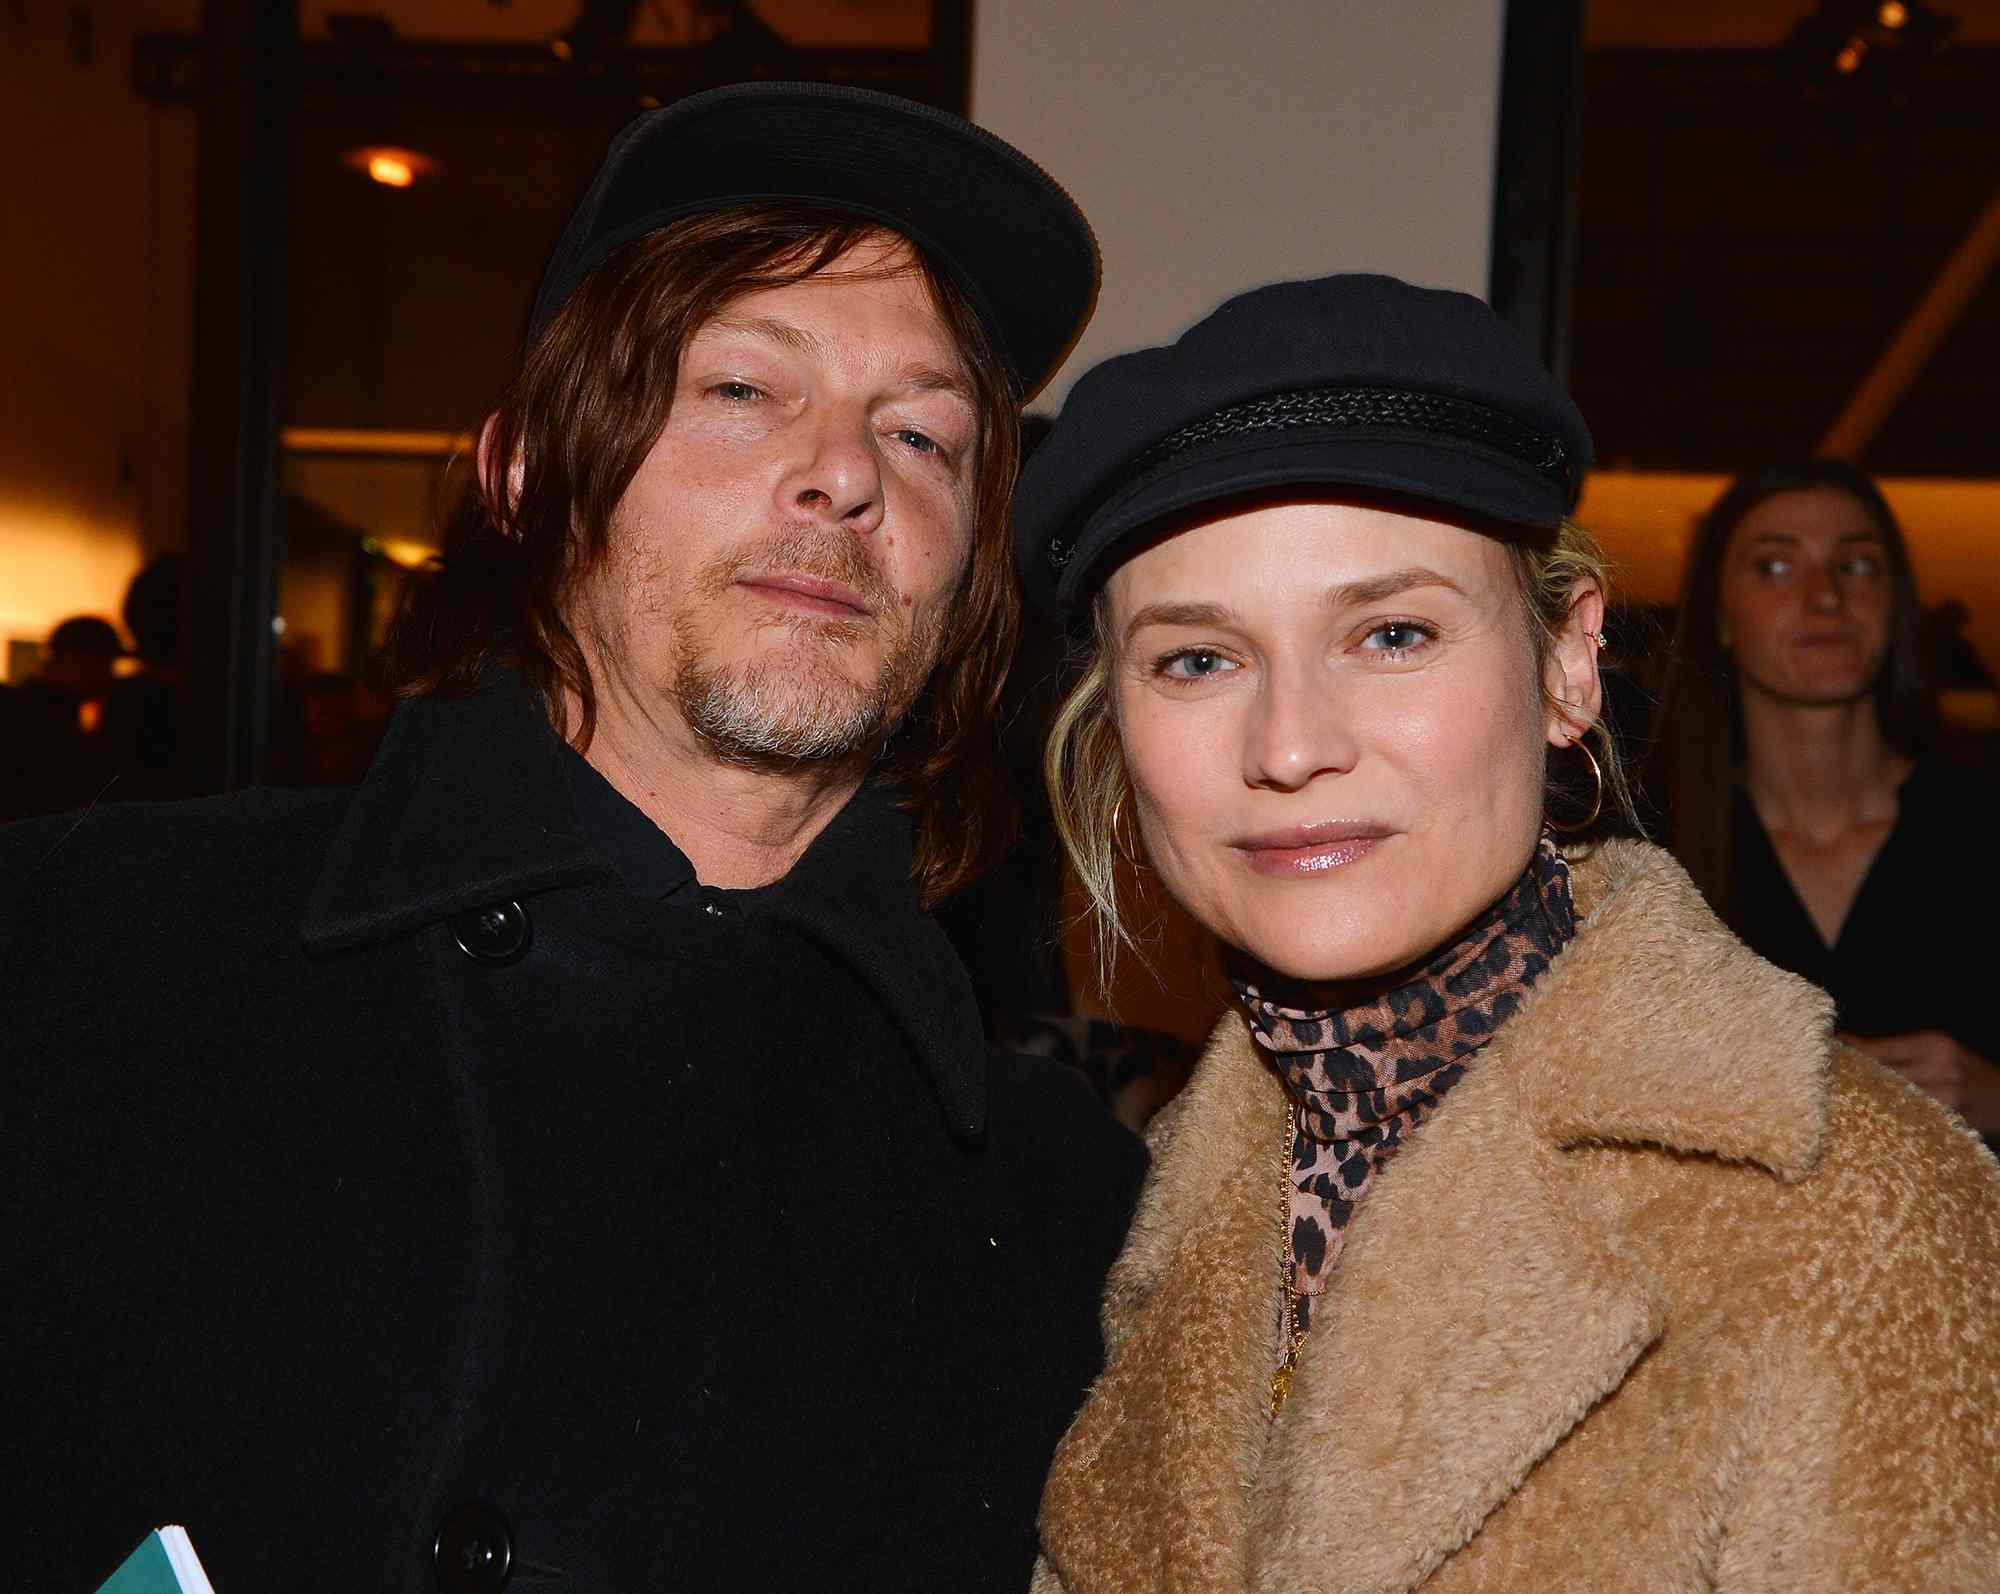 Norman Reedus and Diane Kruger attend 24th Annual ARTWALK NY at Spring Studios on November 28, 2018 in New York City